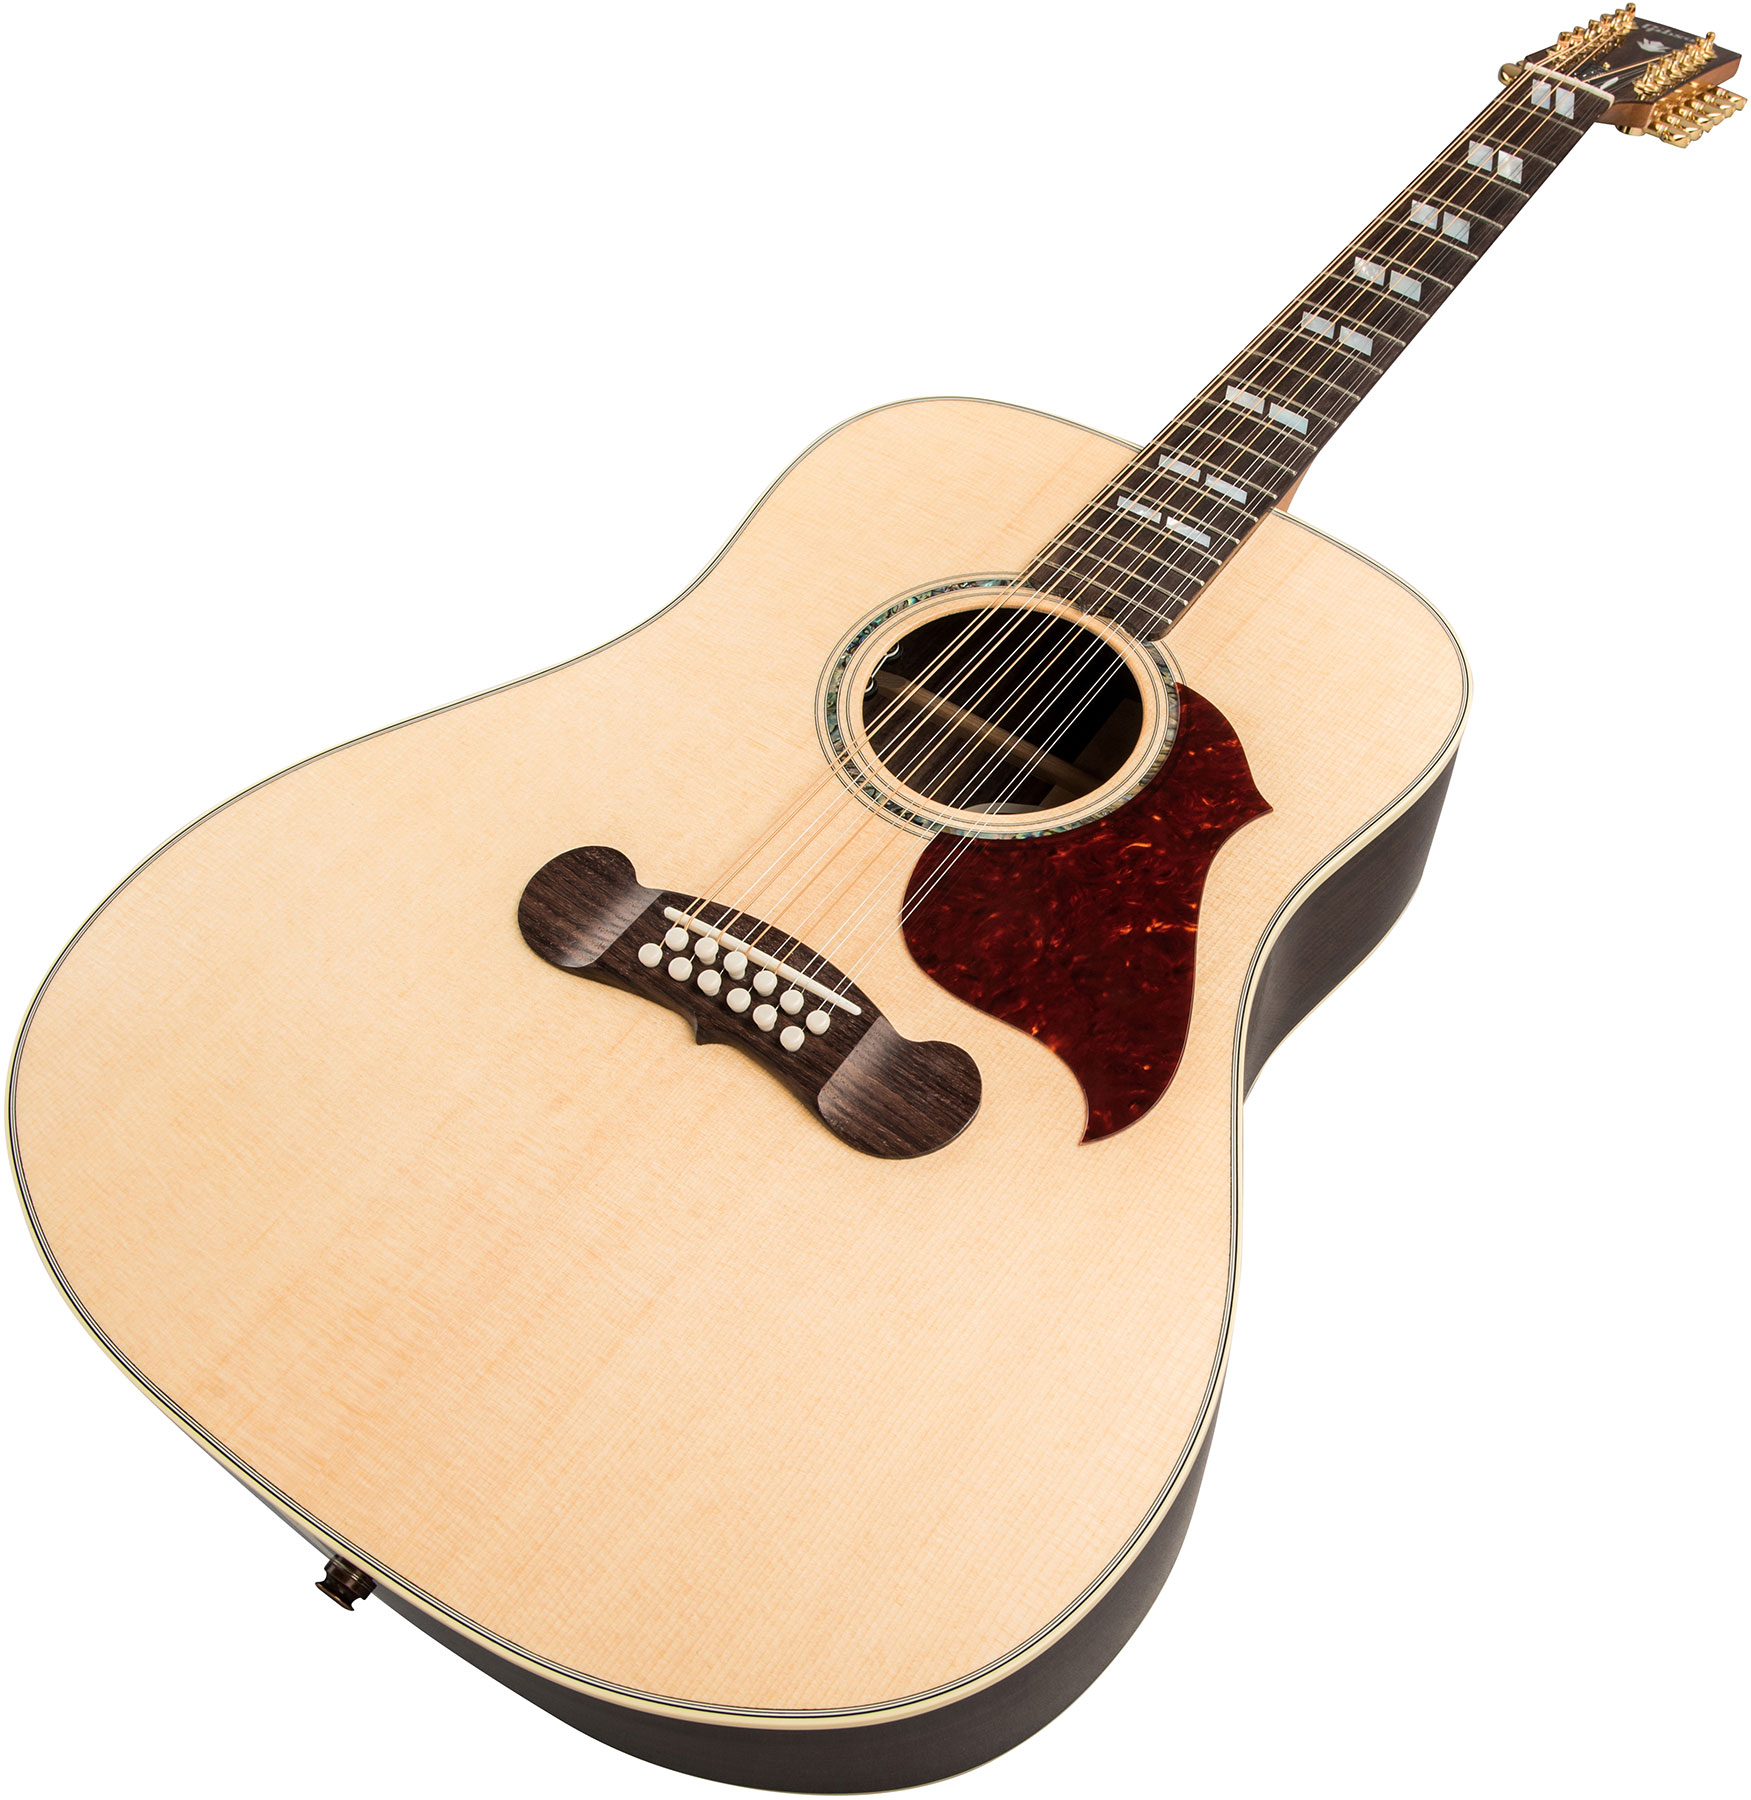 Gibson Songwriter 12-string 2019 Dreadnought 12-cordes Epicea Palissandre Rw - Antique Natural - Westerngitarre & electro - Variation 1